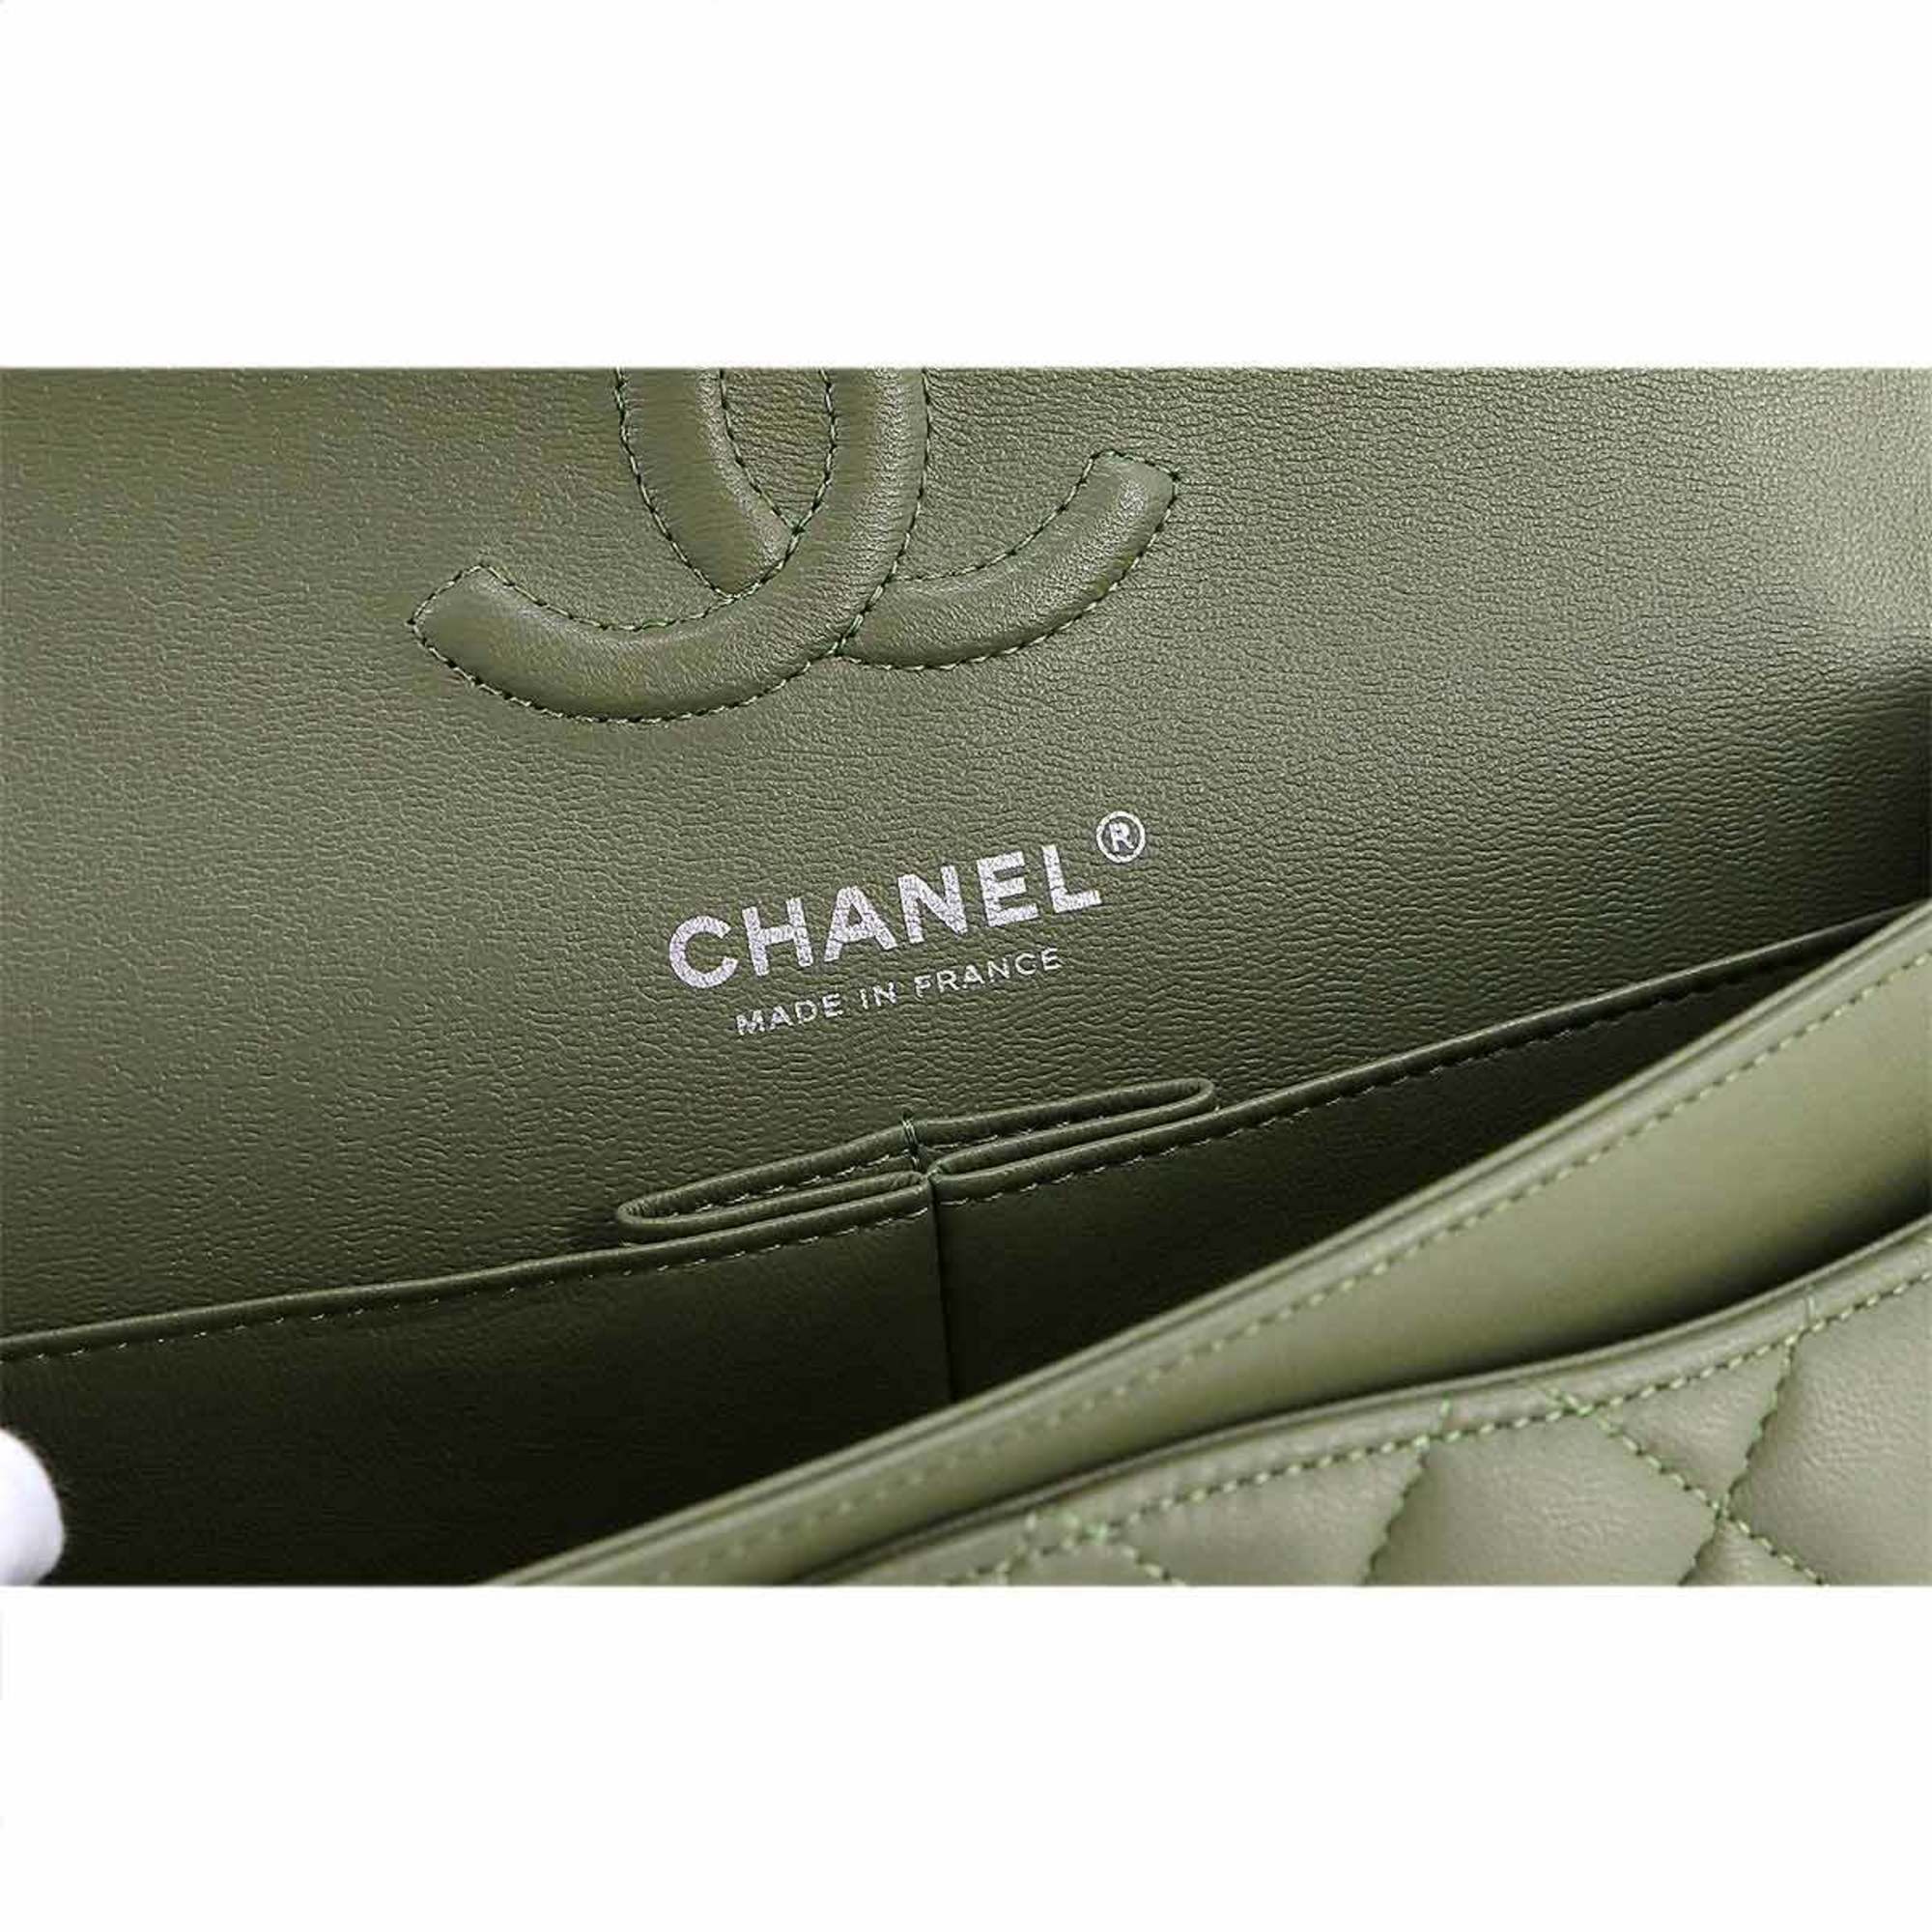 CHANEL Matelasse 23 Chain Shoulder Bag Leather Moss Green A01113 Silver Hardware